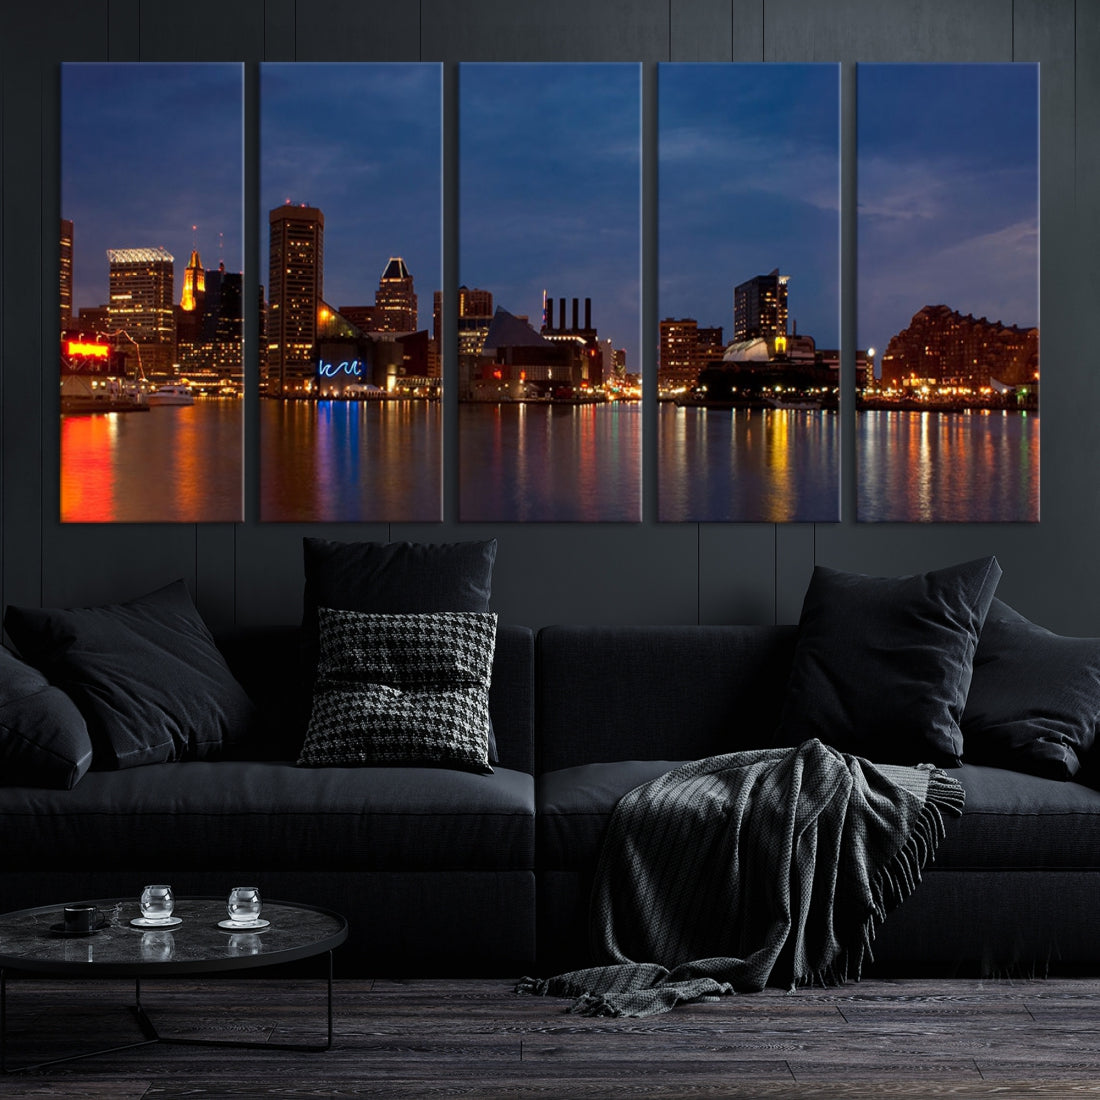 Baltimore City Downtown Skyline Cityscape Large Wall Art Canvas Print